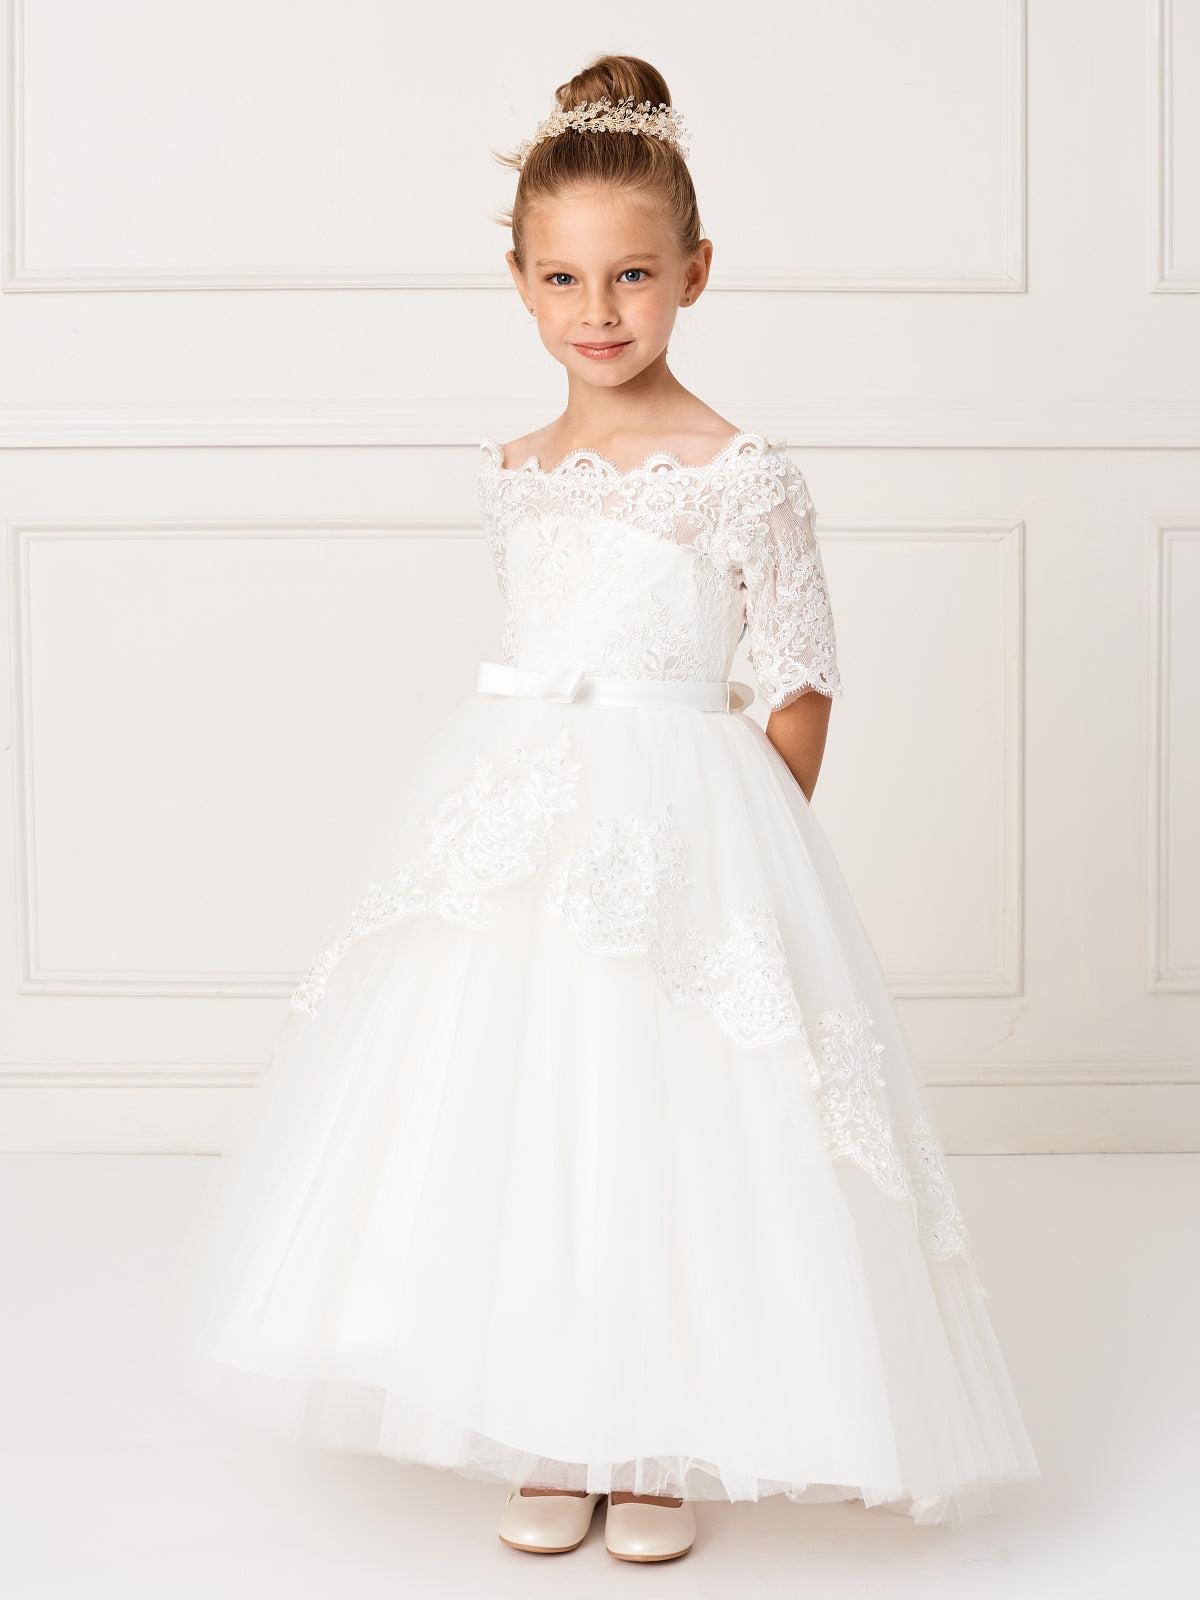 This gorgeous off shoulder dress is perfect for your little girl. The center of the dress has a simple bow at the waist.This dress features a lace peplum skirt with a long train on the back that has beautiful embroidered details. Skirt has additional netting crinoline underneath that can be puffed up if extra fullness is desired. Fully lined, zipper back, and satin sash tie-back.  Available Size: 4  Available Color: Ivory